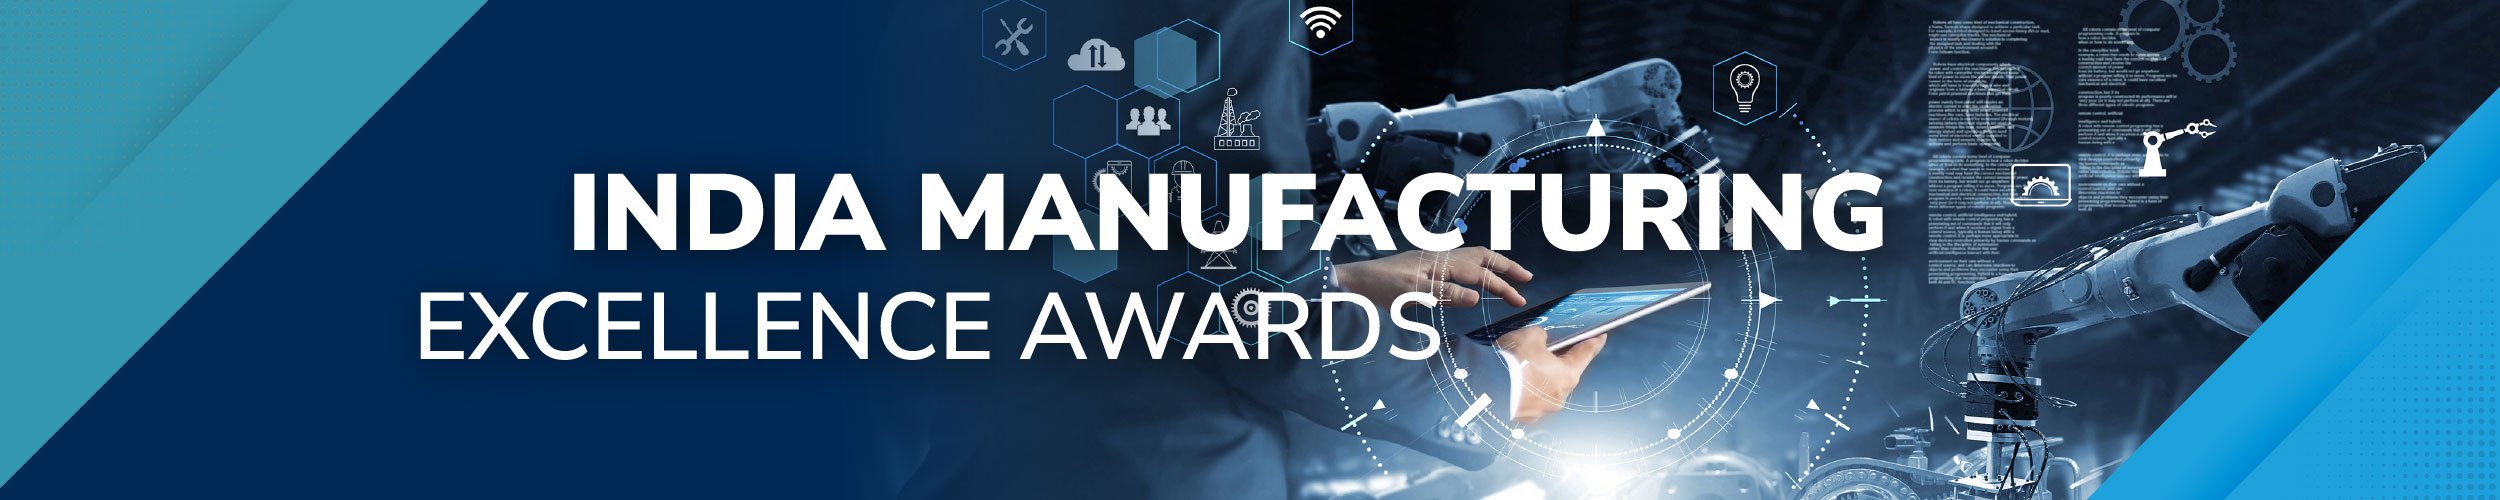 India-Manufacturing-Excellence-Awards